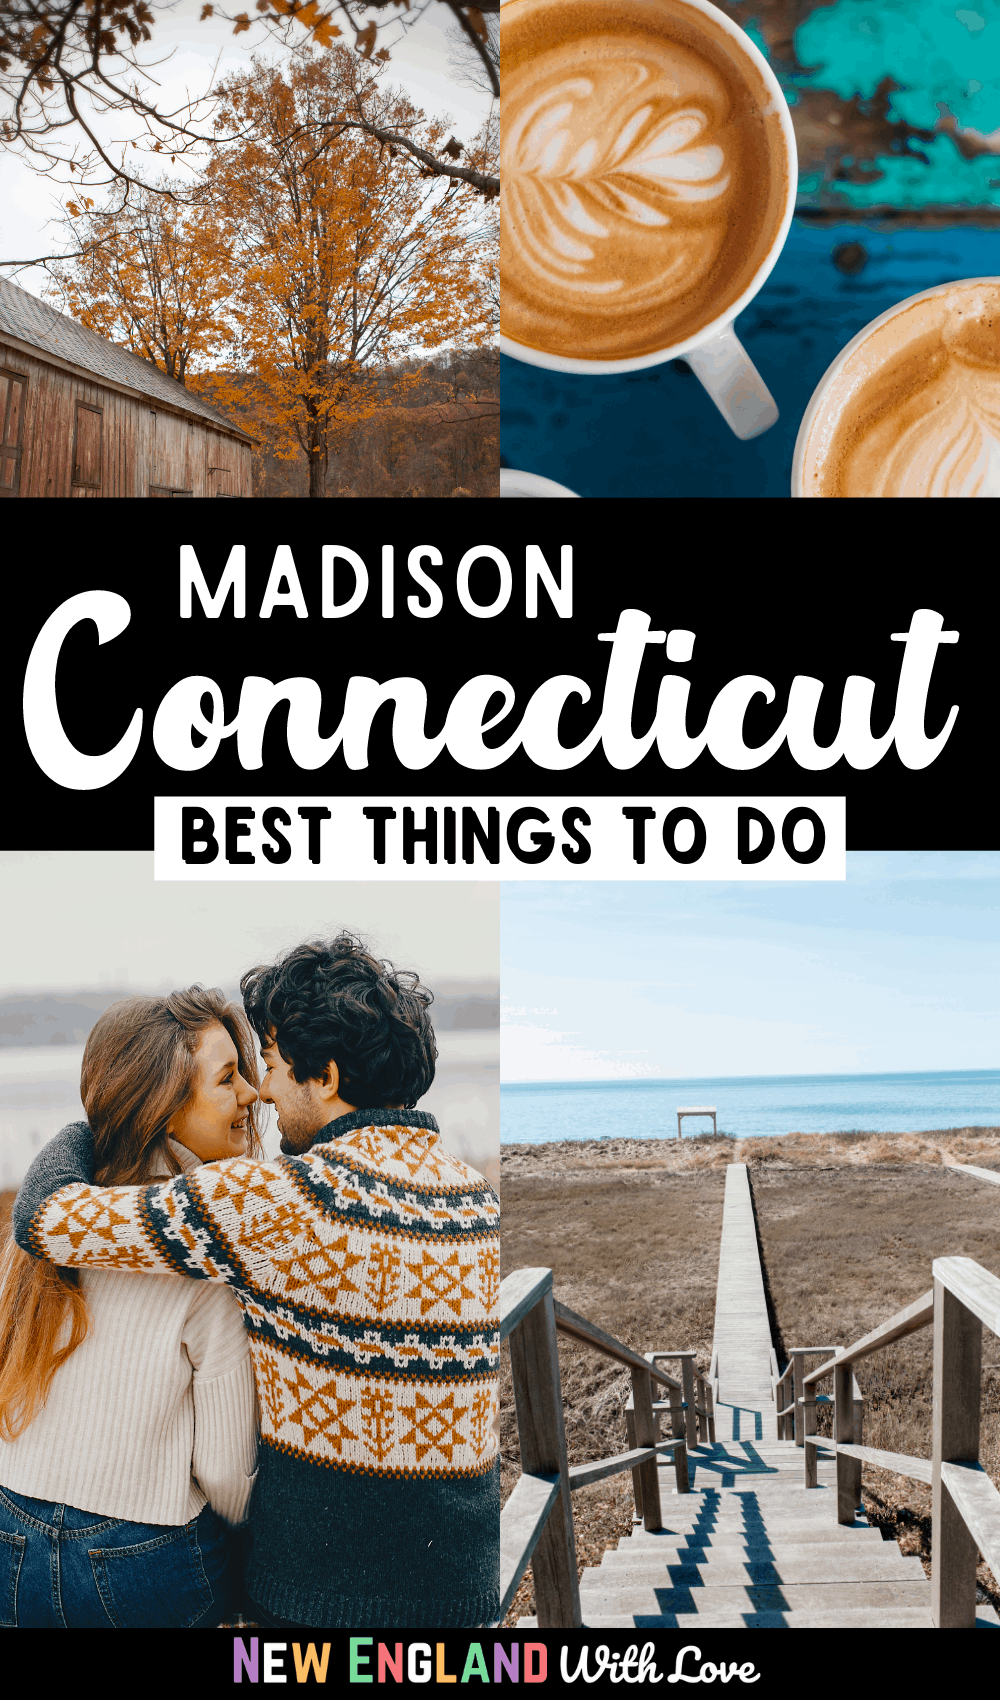 Pinterest graphic reading "Madison Connecticut Best Things To Do"